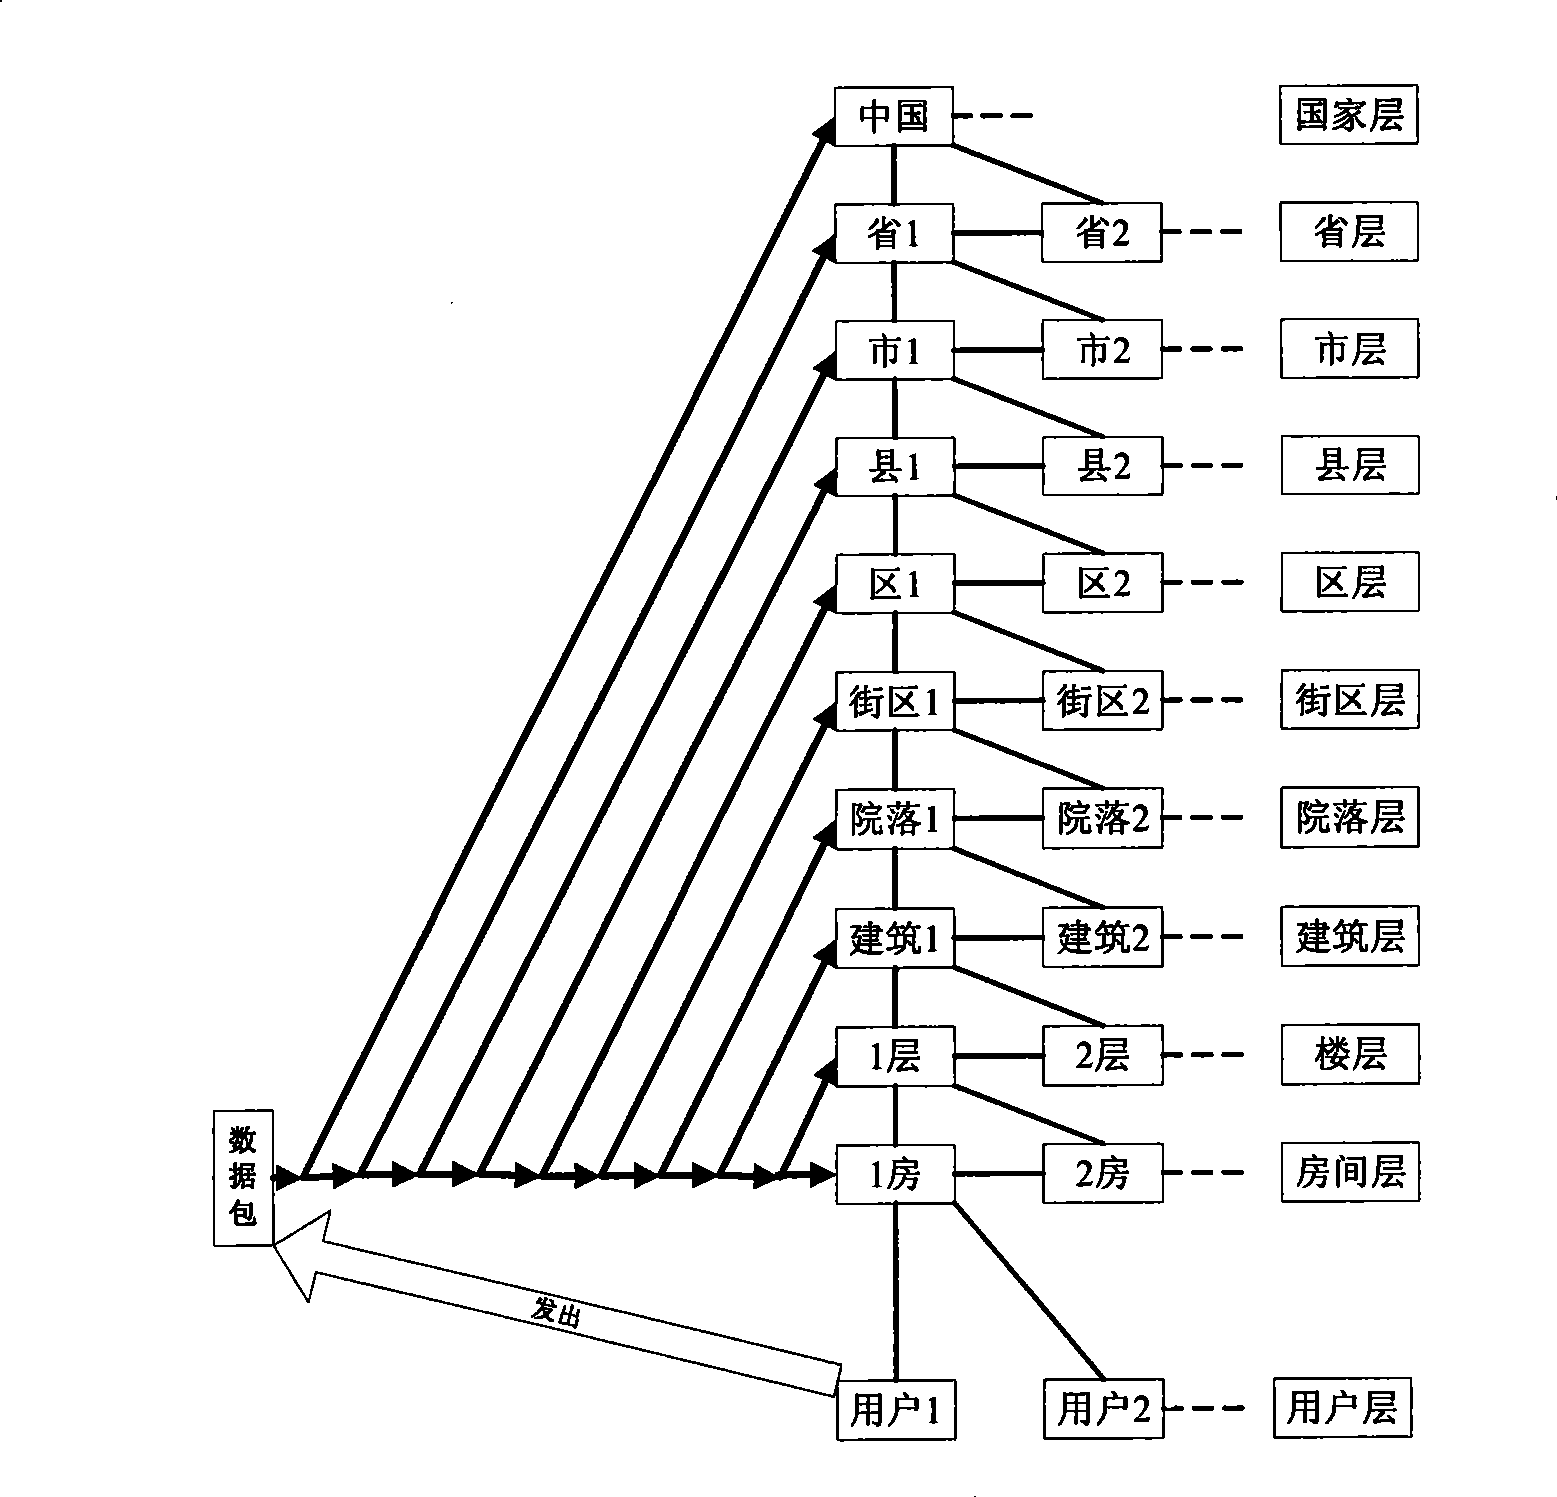 Network address hierarchical structure design and maintenance method based on geographic administrative division